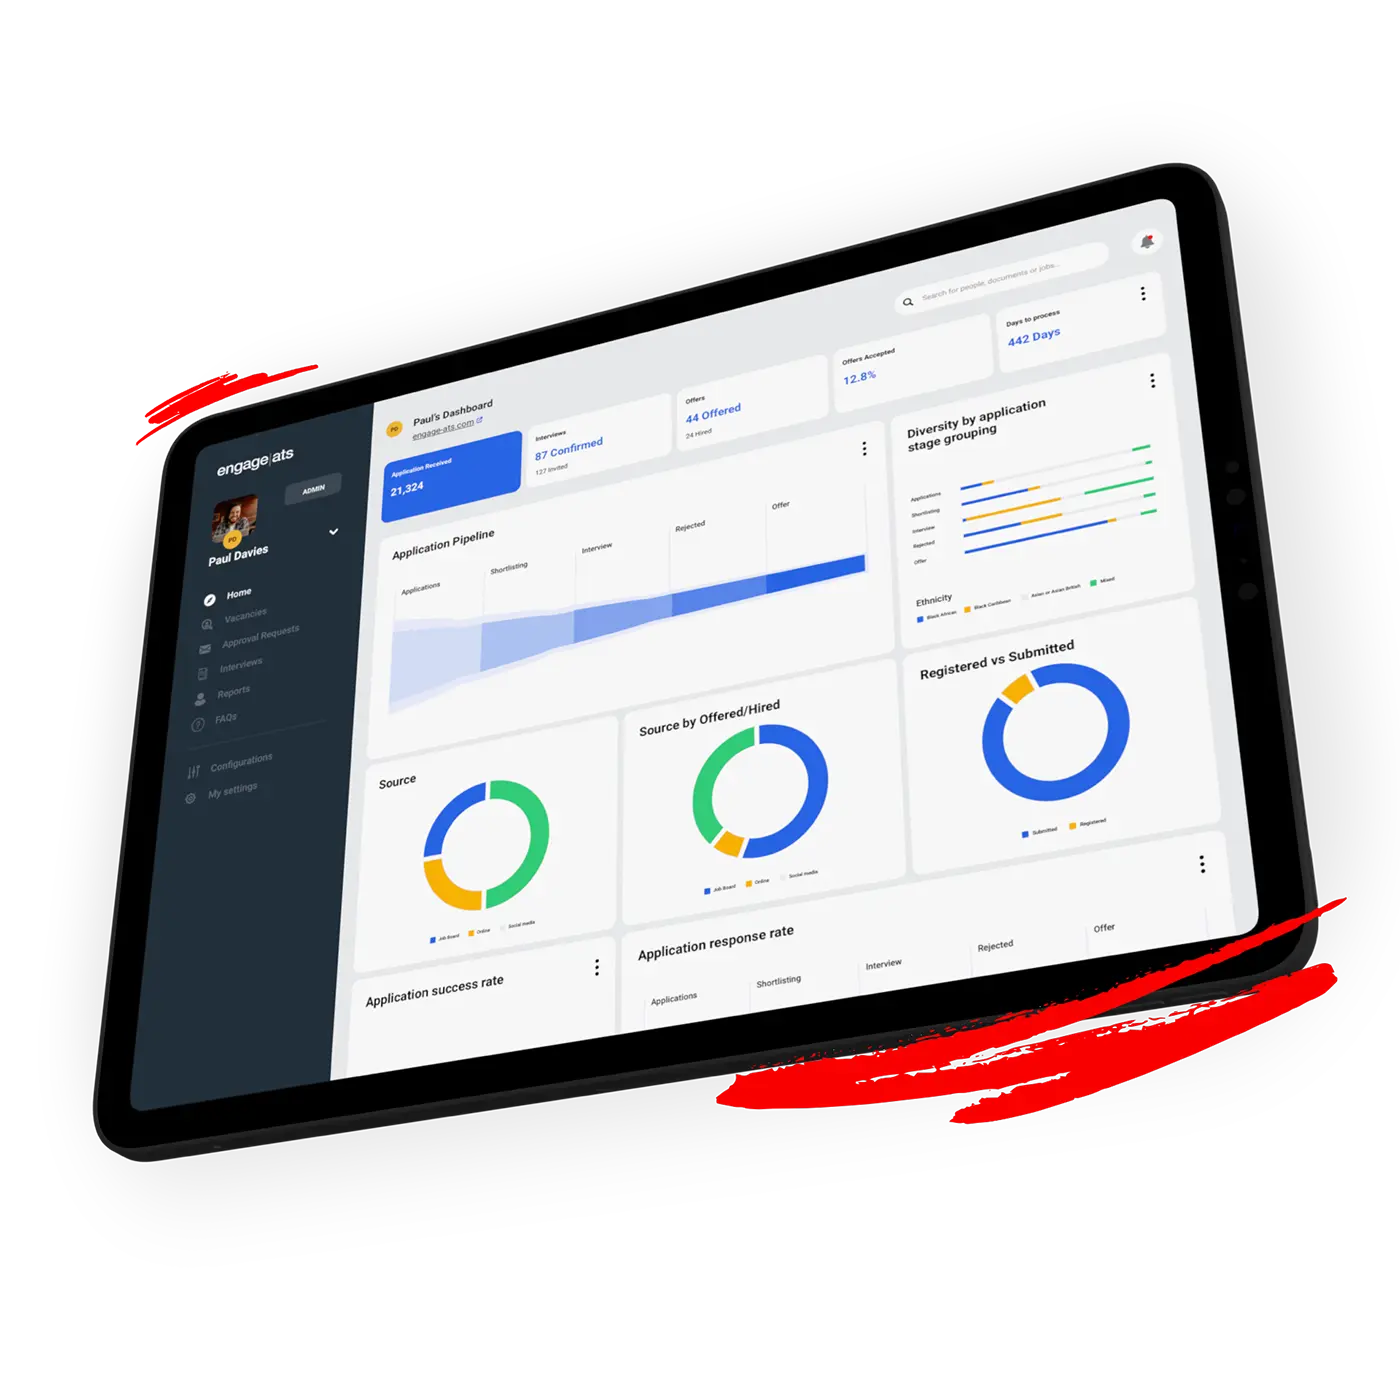 Recruiter dashboard in a tablet